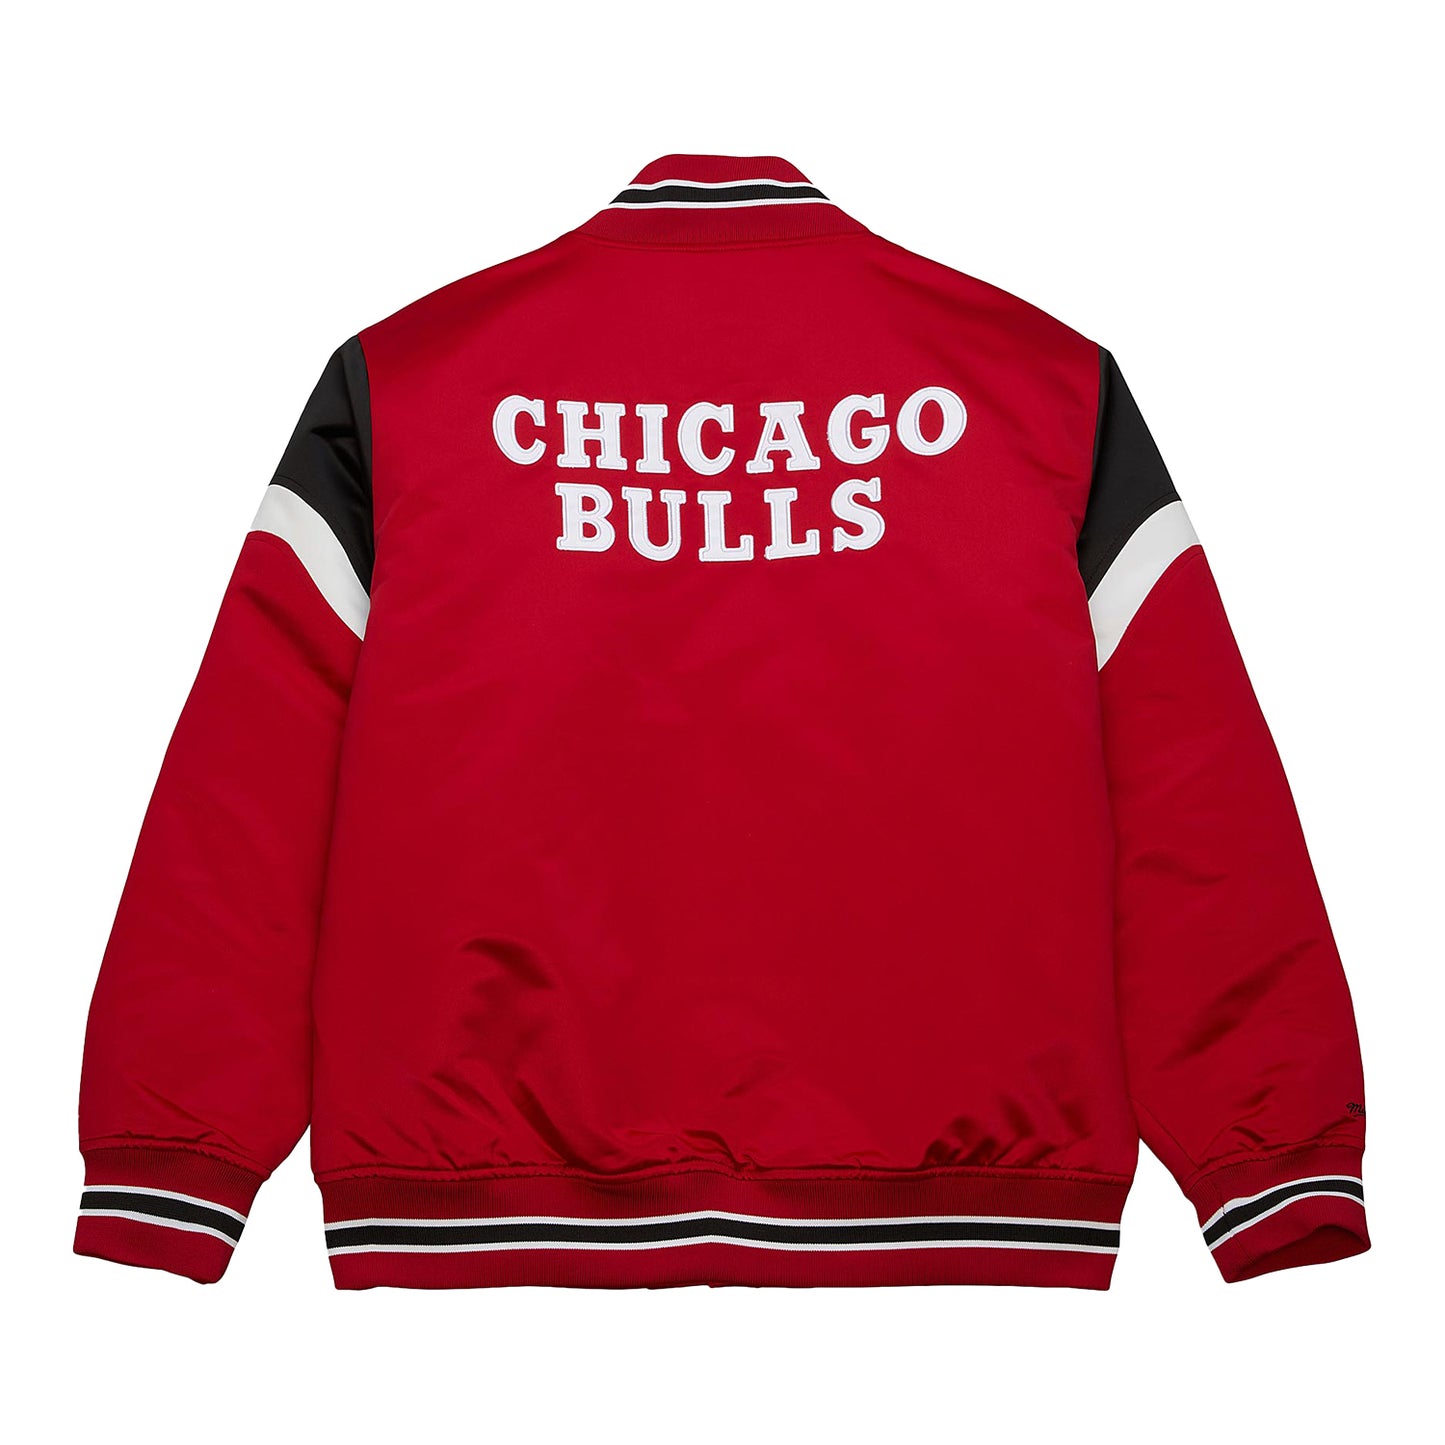 Chicago Bulls Mitchell & Ness Eastern Conference Jacket in red - back view